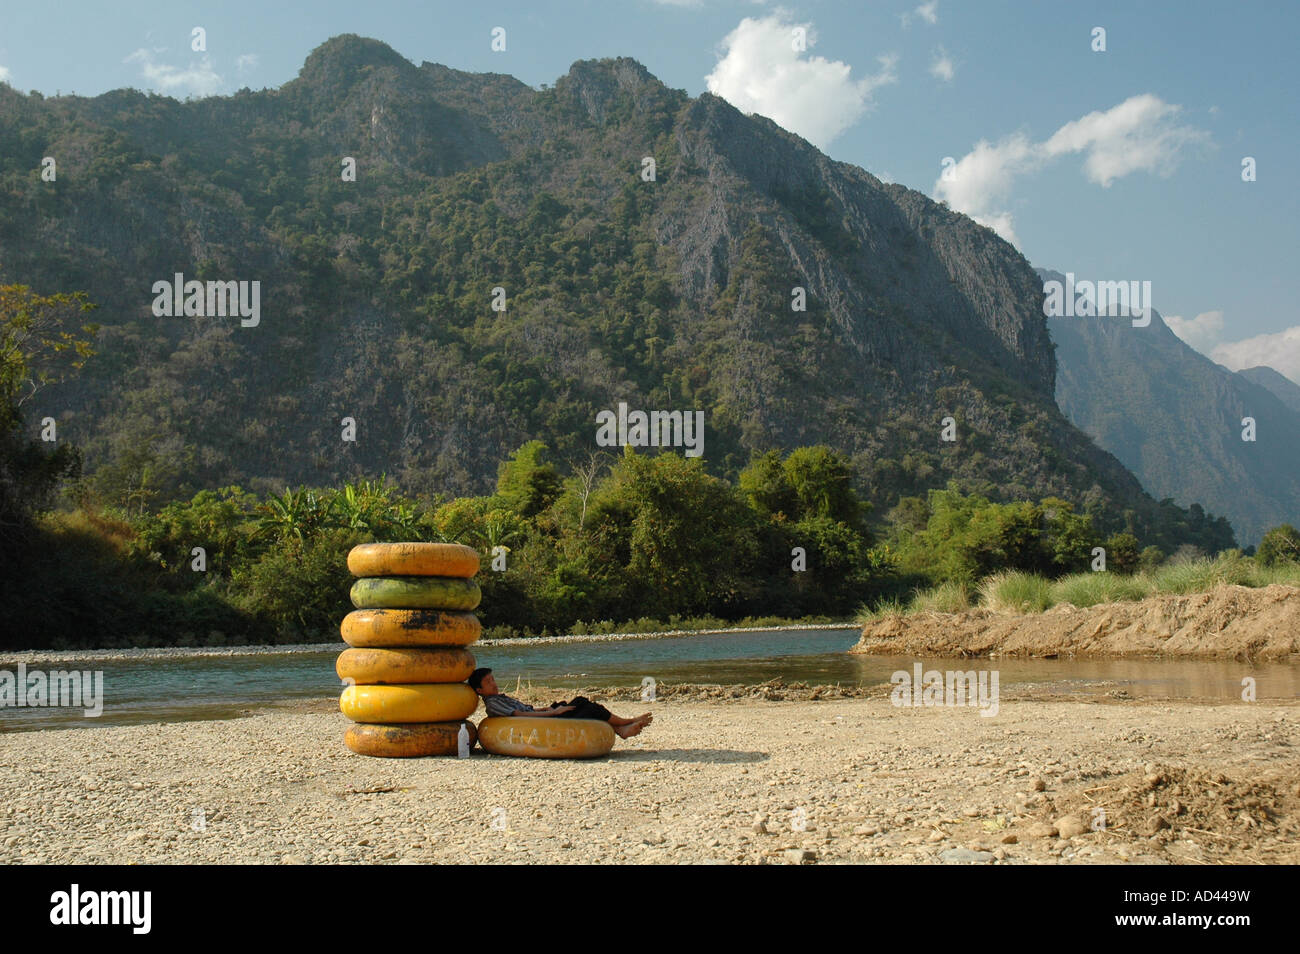 A young boy lays in the shade of inflated inner tubes which he hopes to rent to tourists to float down the river in Laos. Stock Photo